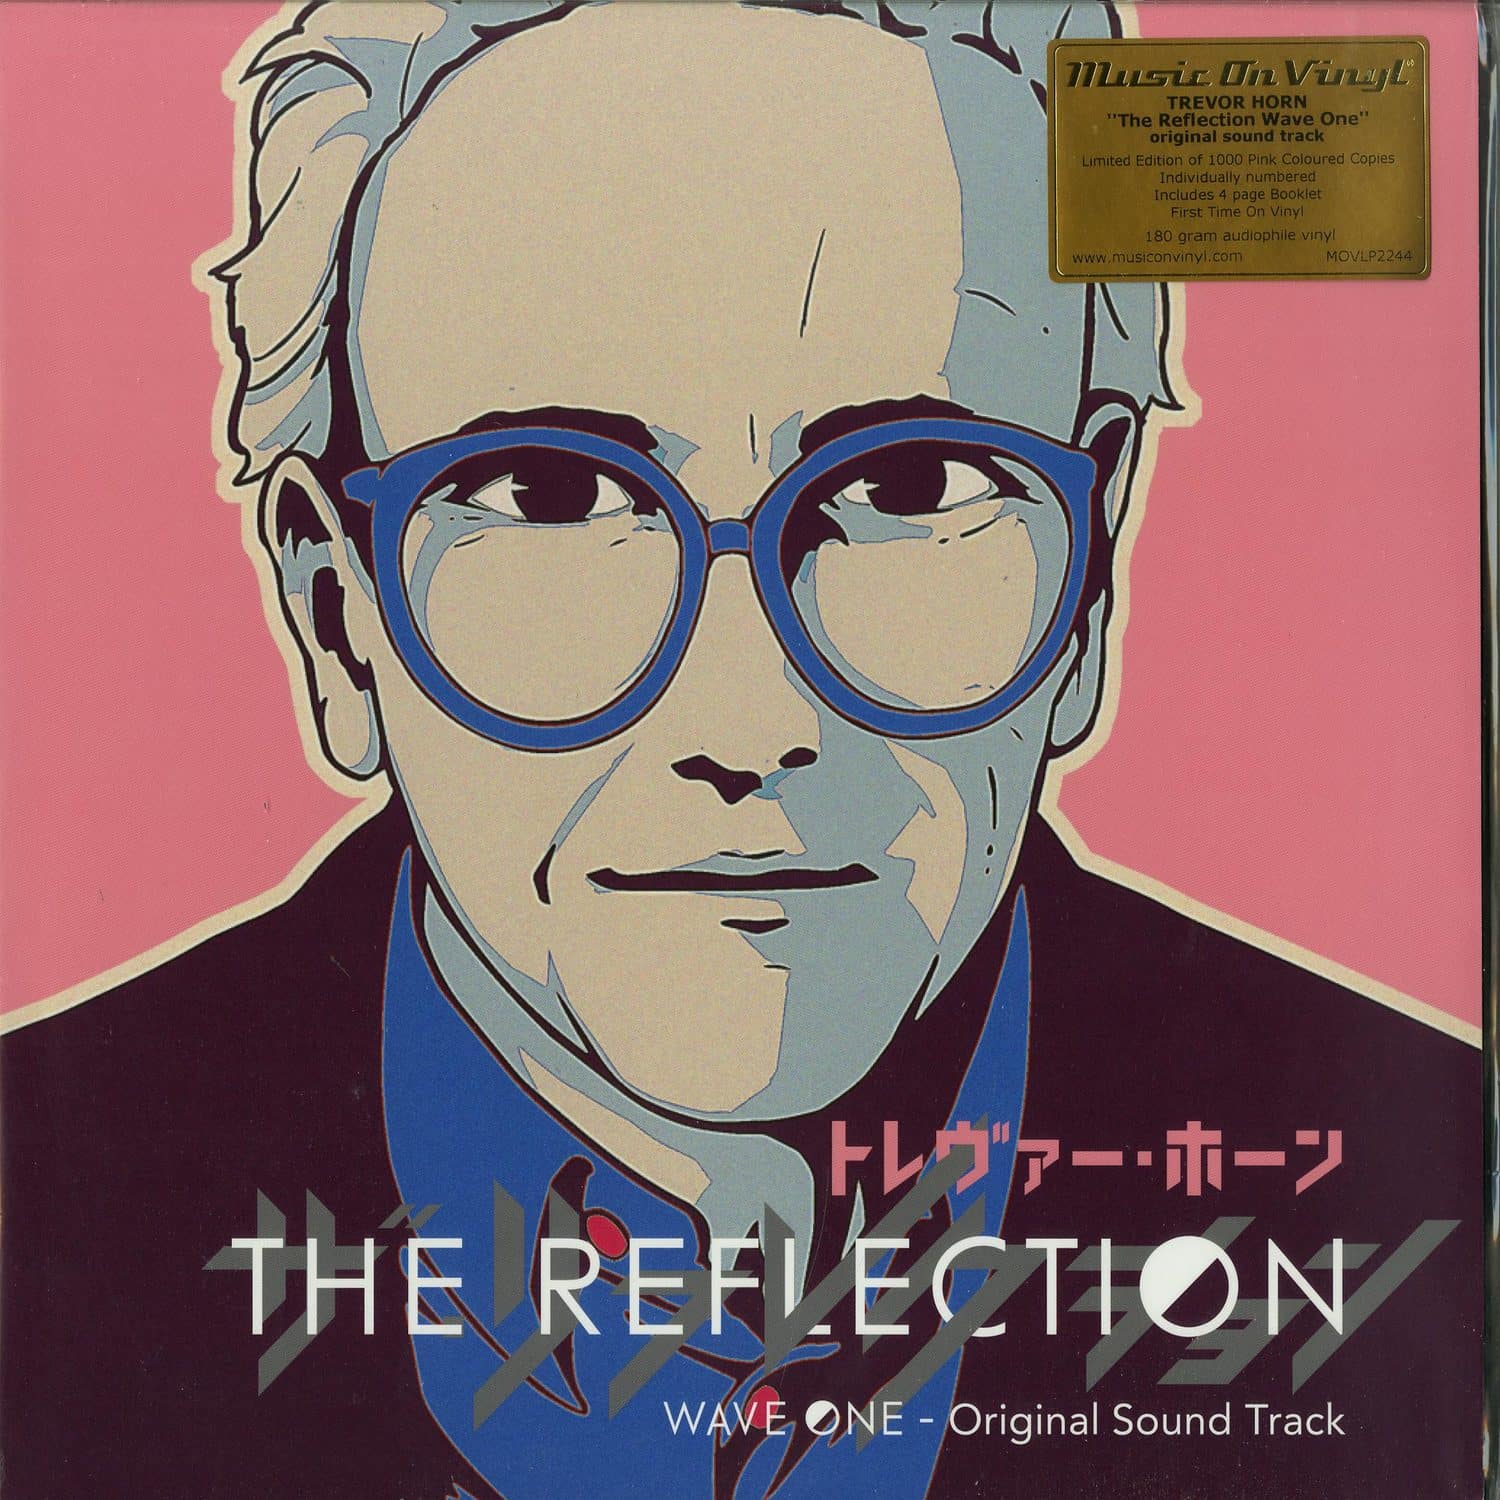 Trevor Horn - THE REFLECTION - WAVE ONE O.S.T. 